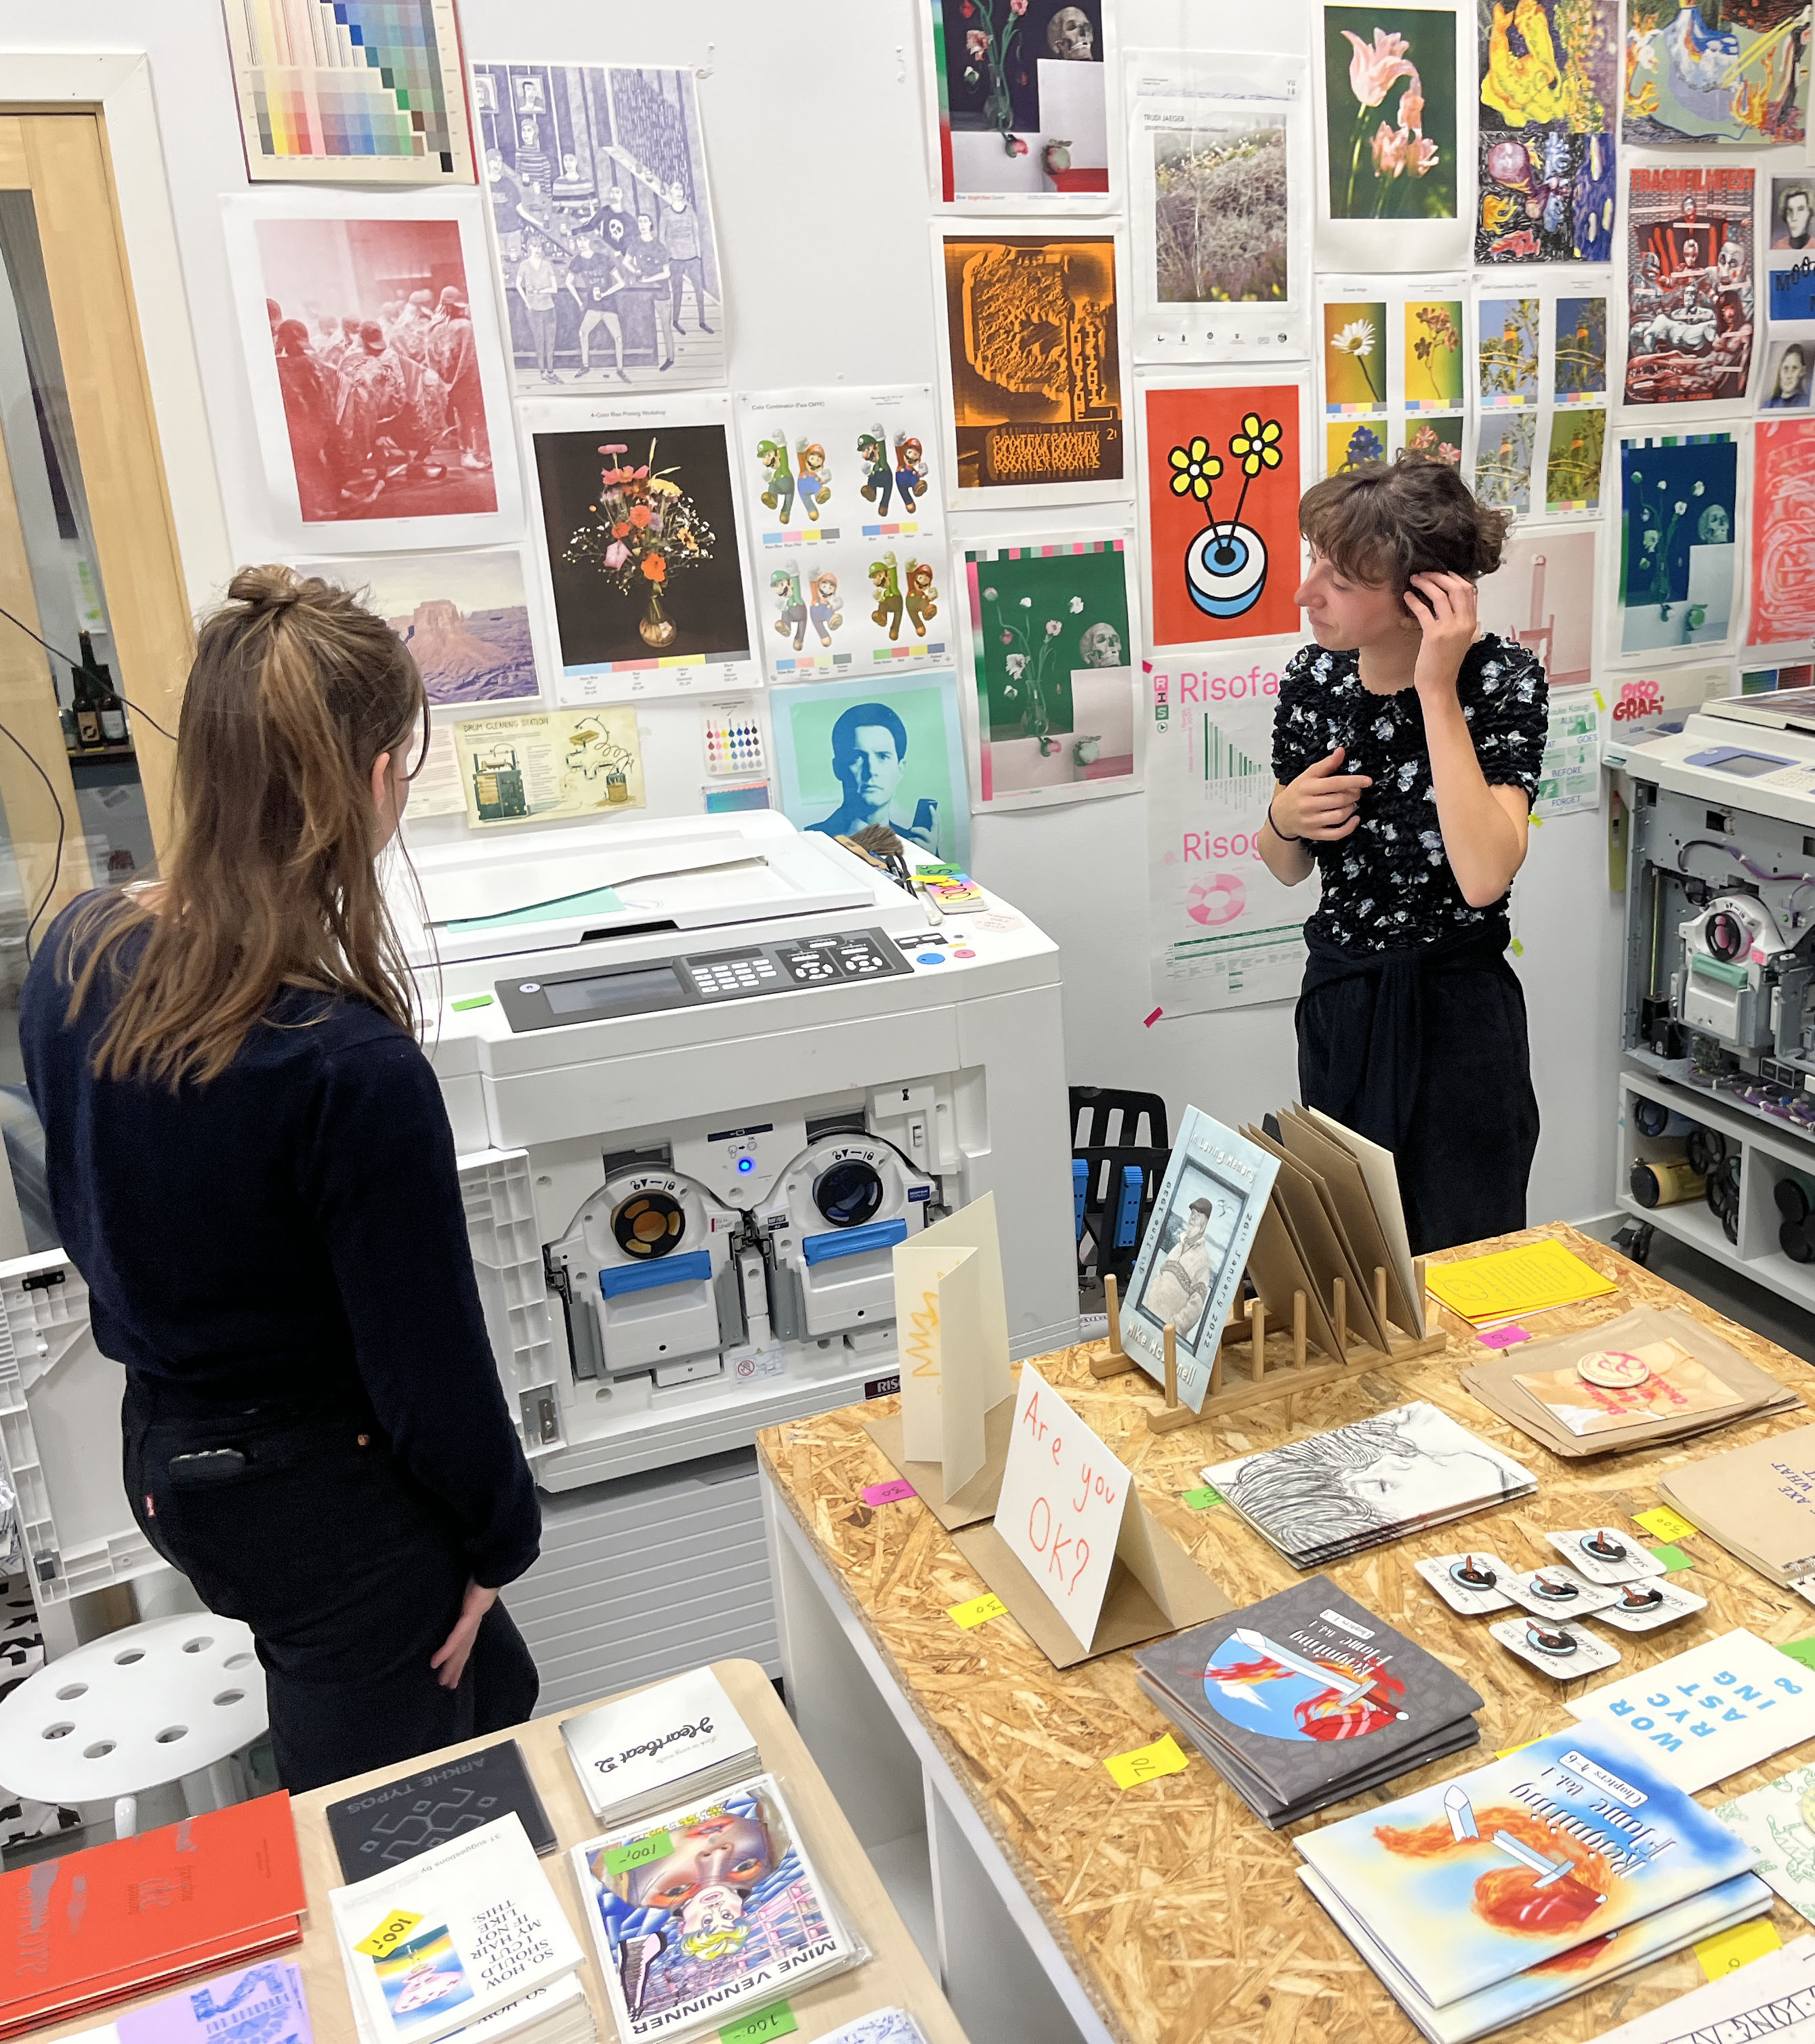 Two people are standing in our workshop next to a risograph printer, looking at the printer. In the background is our wall, filled with risoprinted posters. In the foreground there are two tables with several riso printed zines and prints.